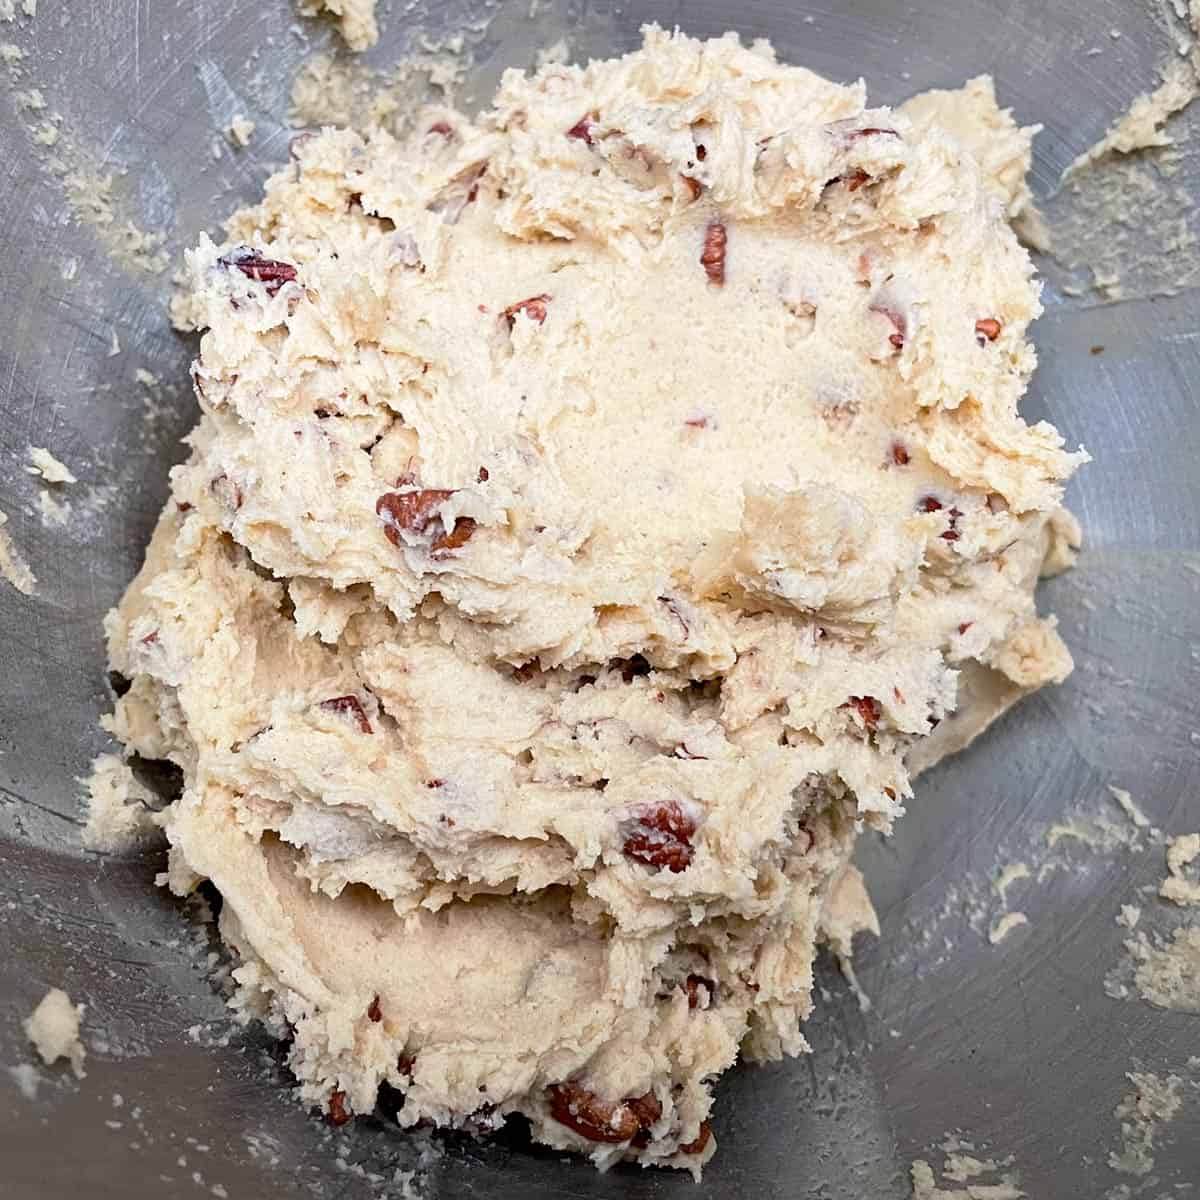 All ingredients mixed for the maple butter pecan cookies in a mixer bowl.